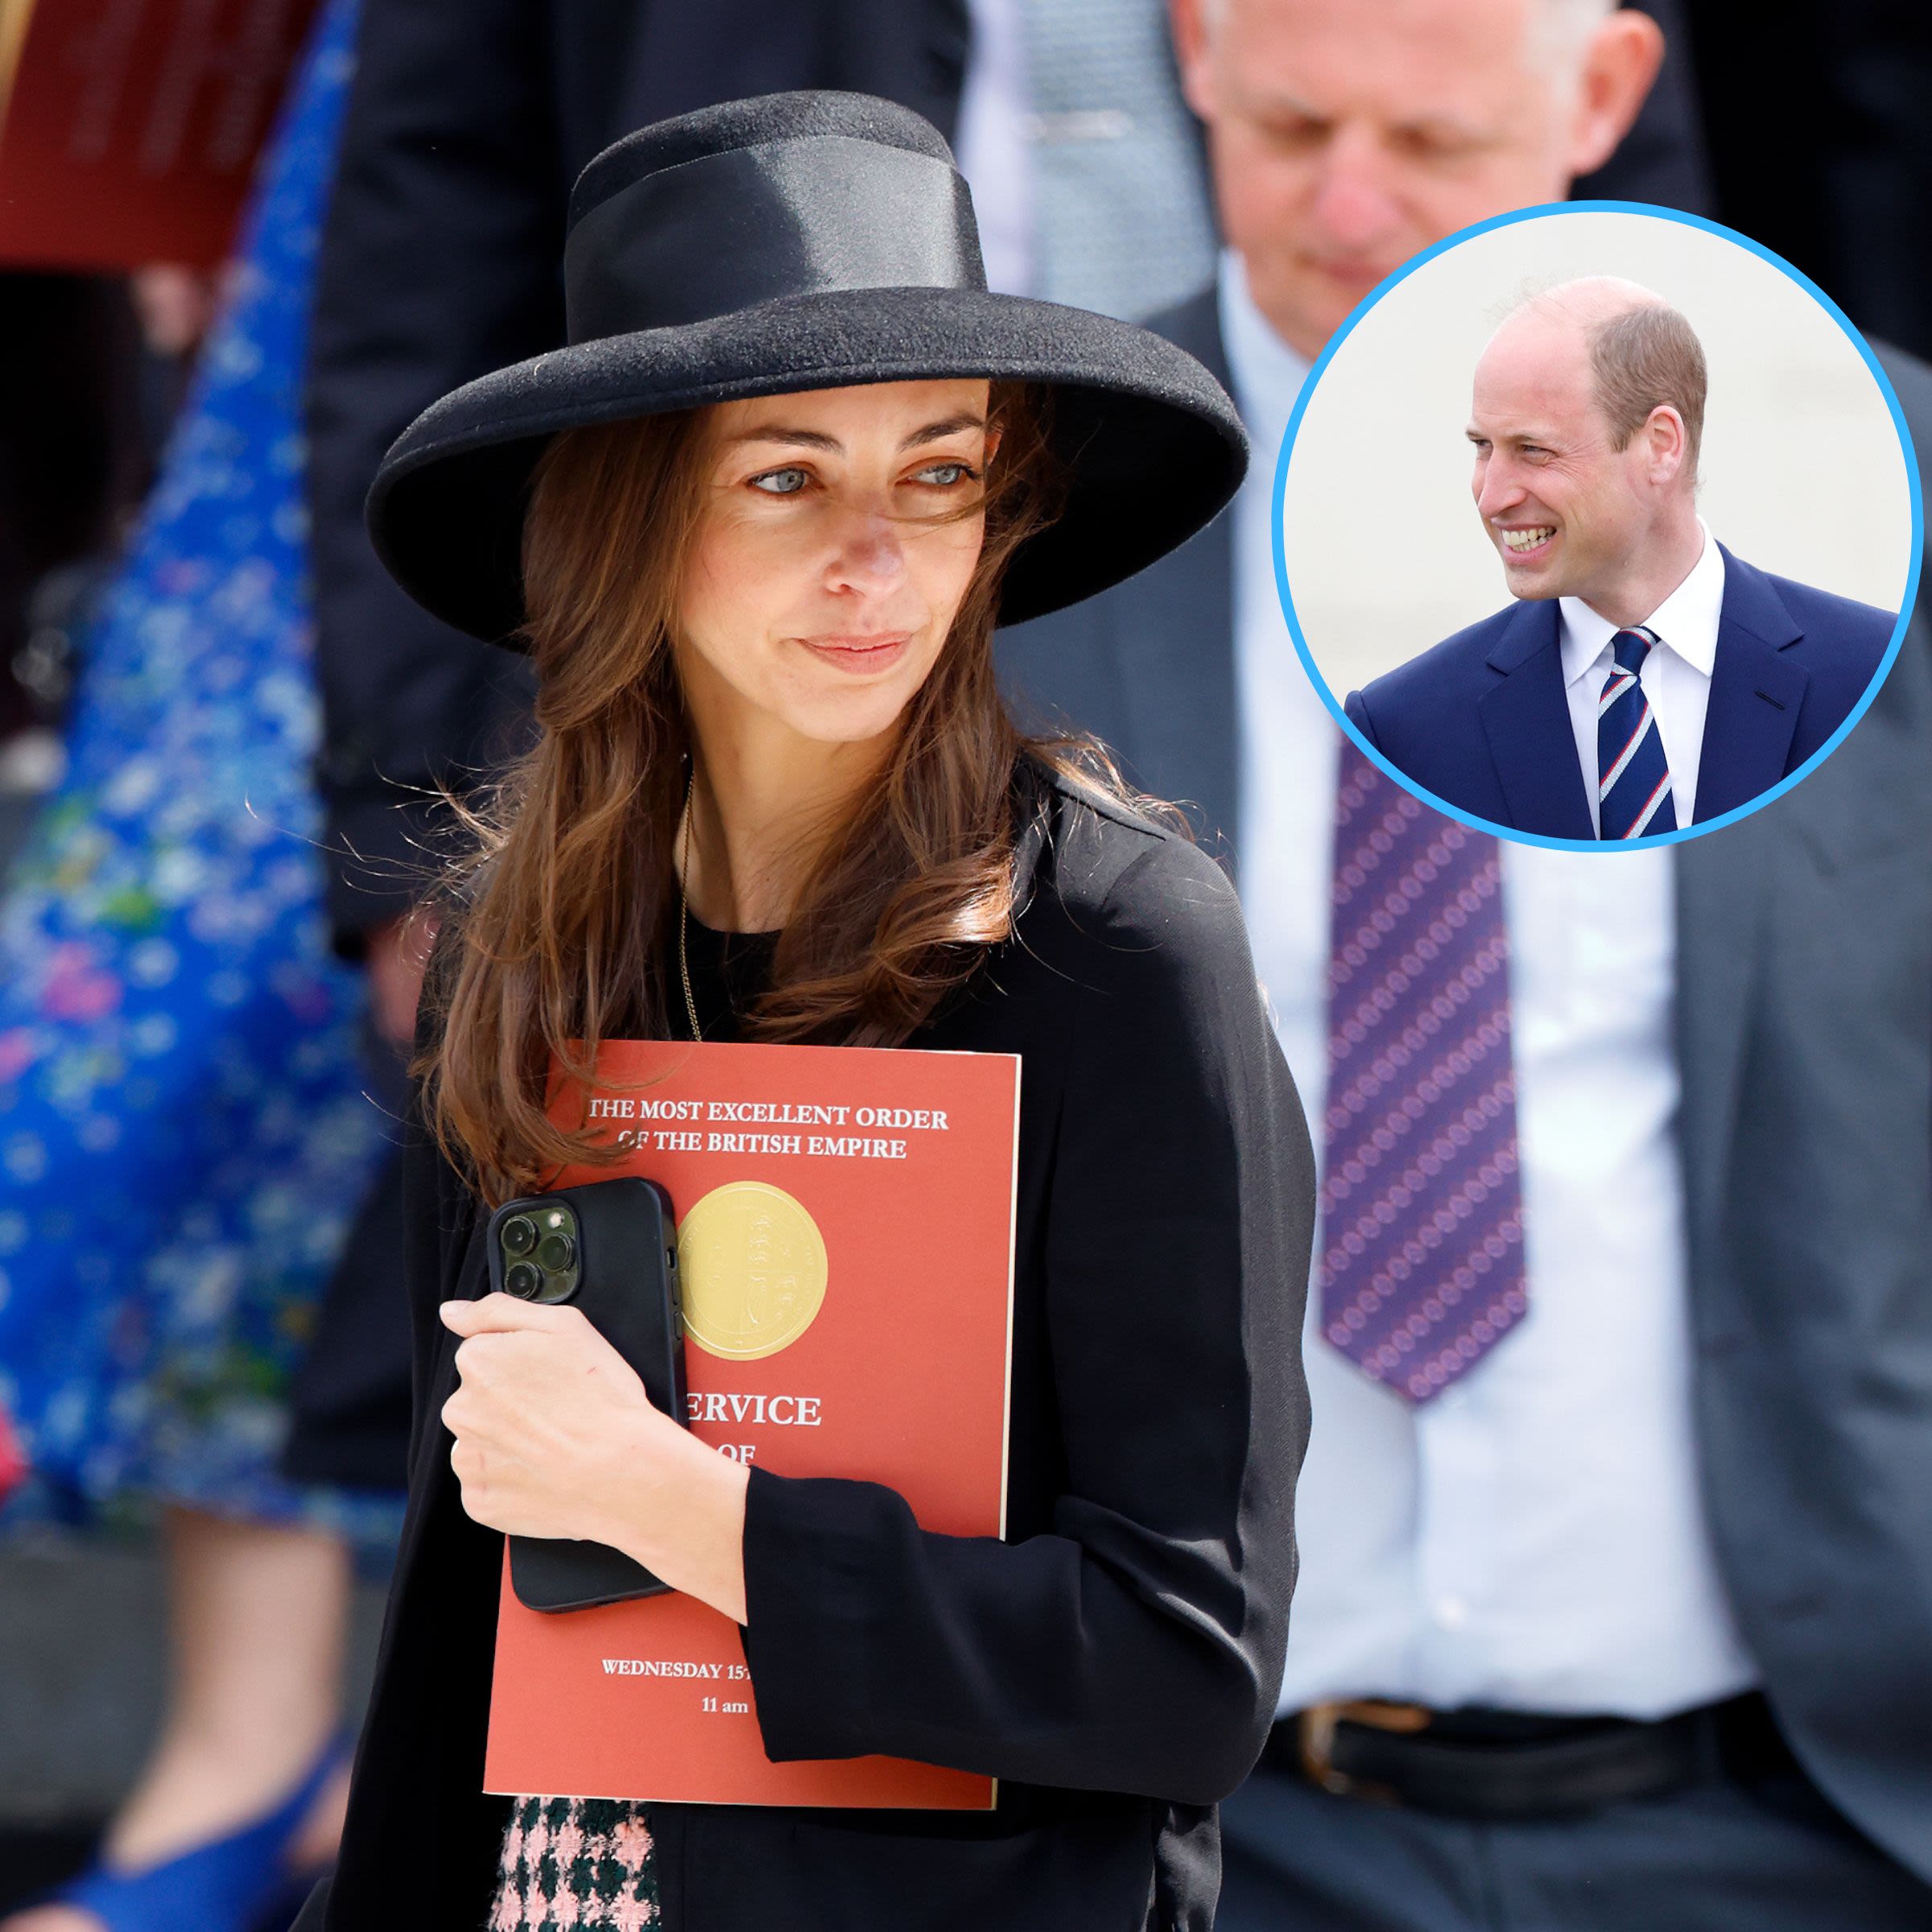 Rose Hanbury Spotted for 1st Time With Husband David After Prince William Cheating Rumors